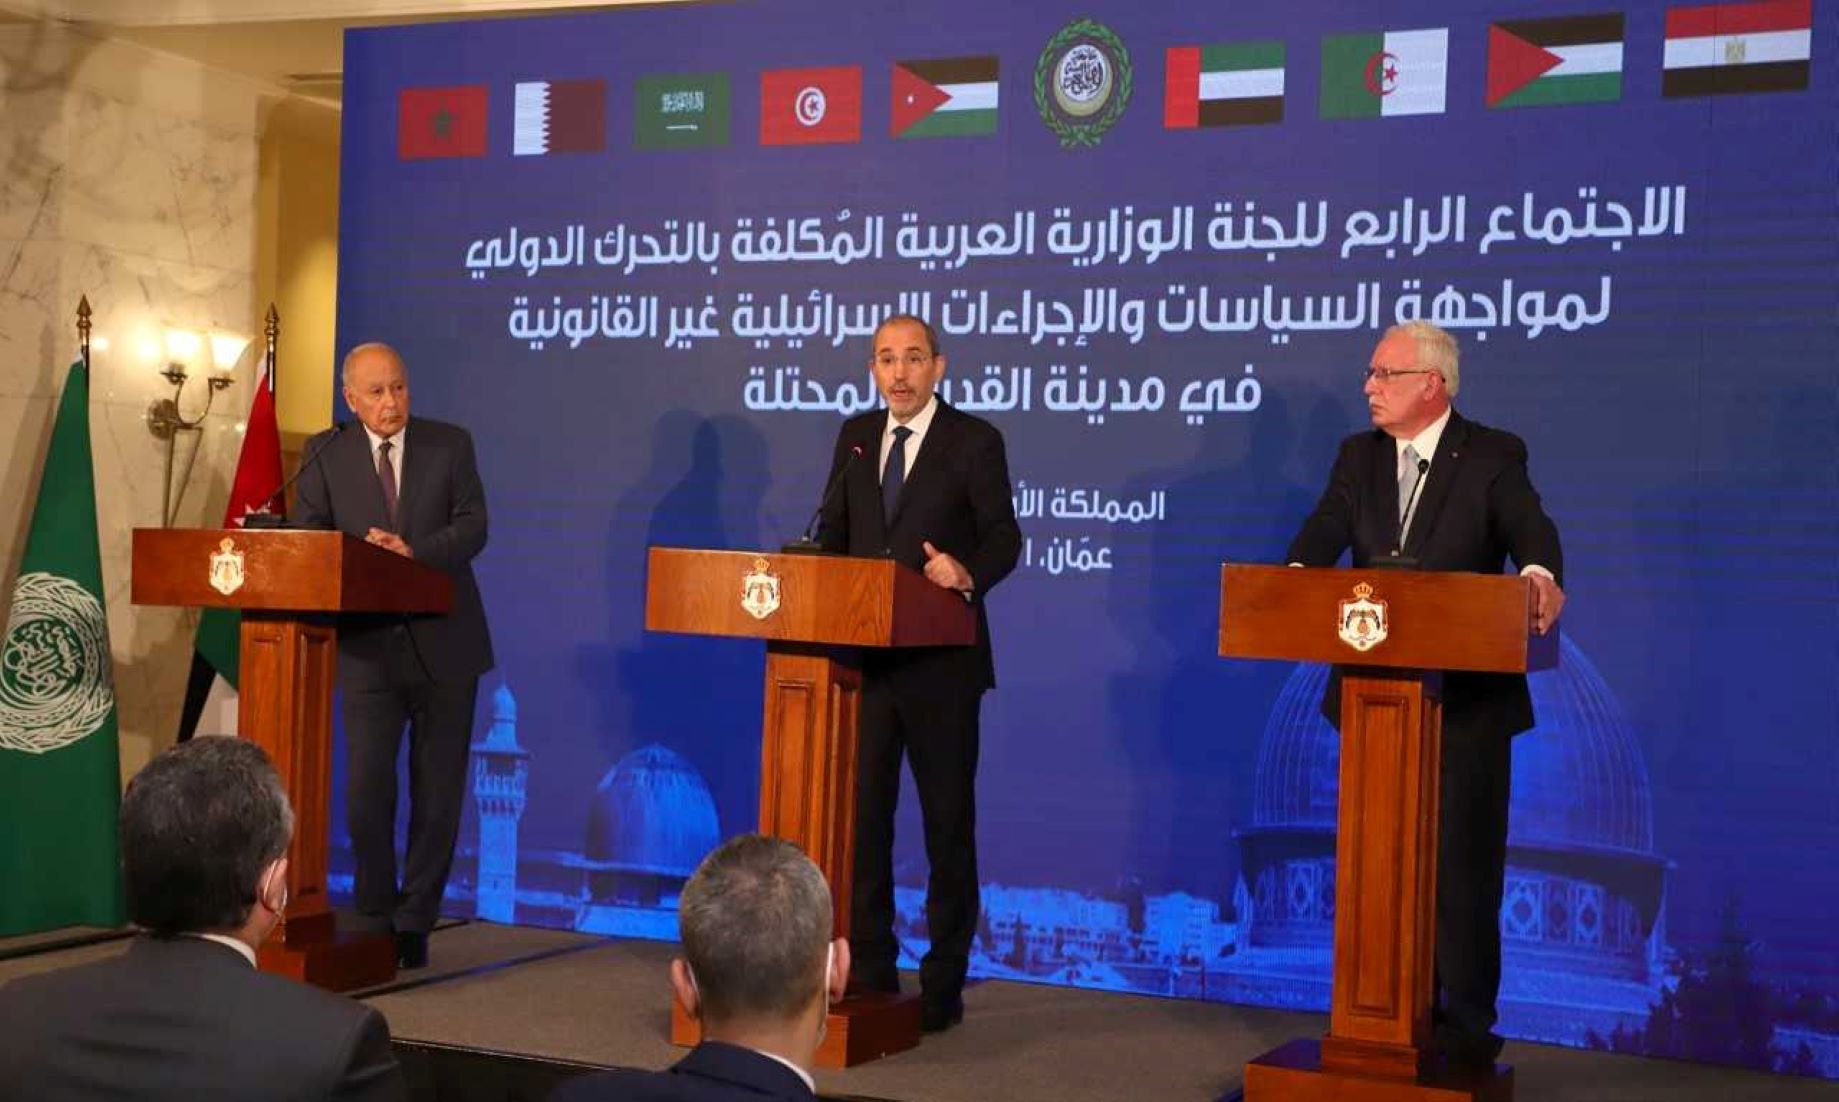 Jordanian FM Discussed Israeli Escalation With Arab Counterparts